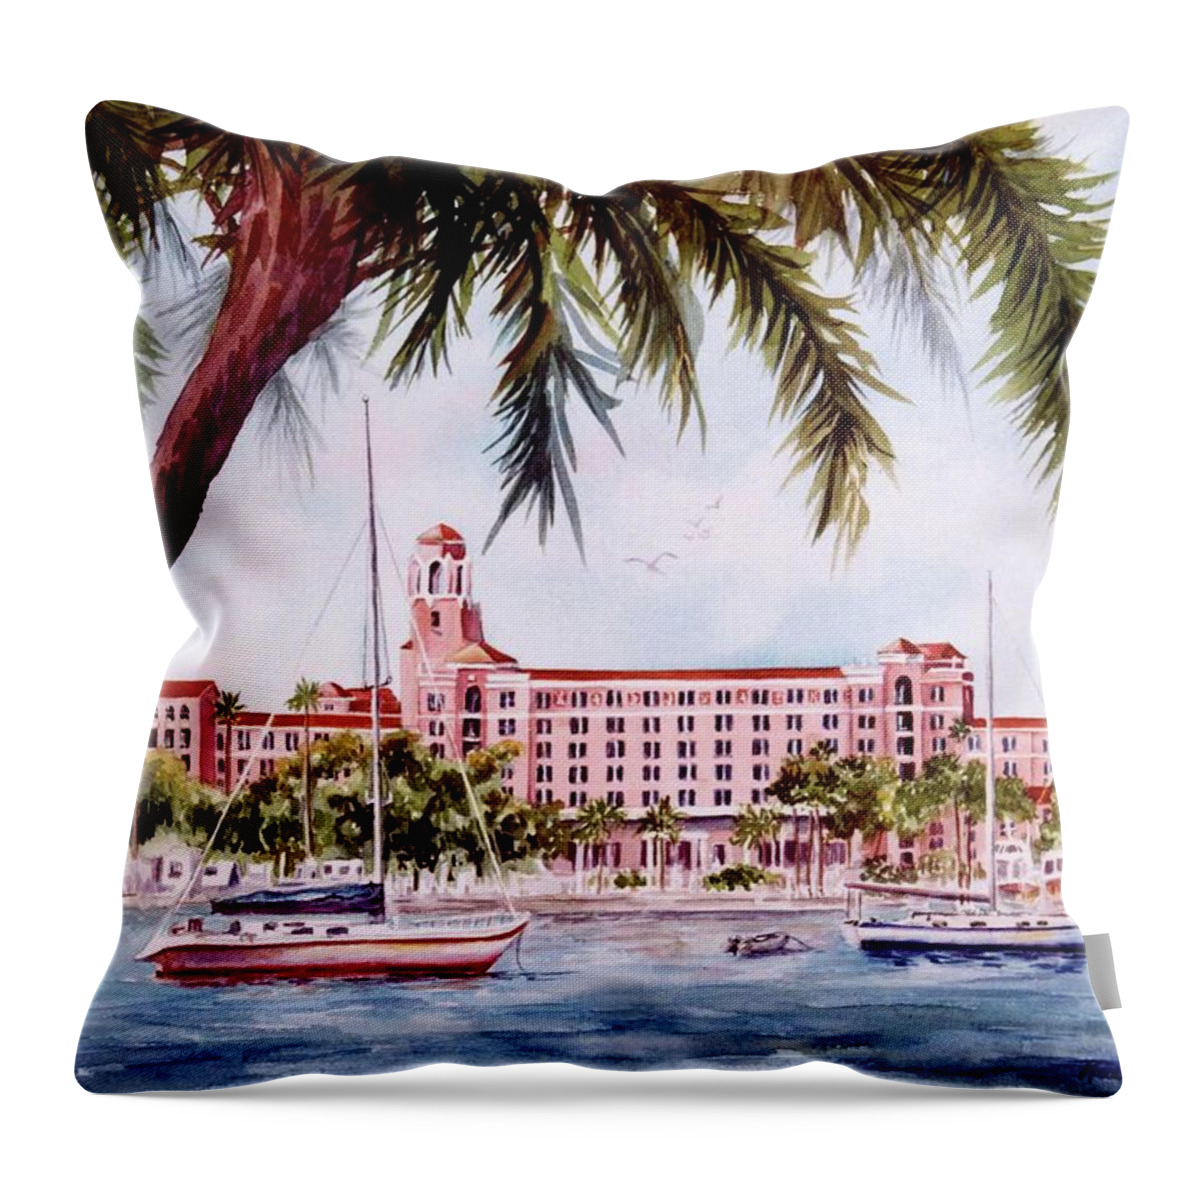 Vinoy Throw Pillow featuring the painting Vinoy View by Roxanne Tobaison